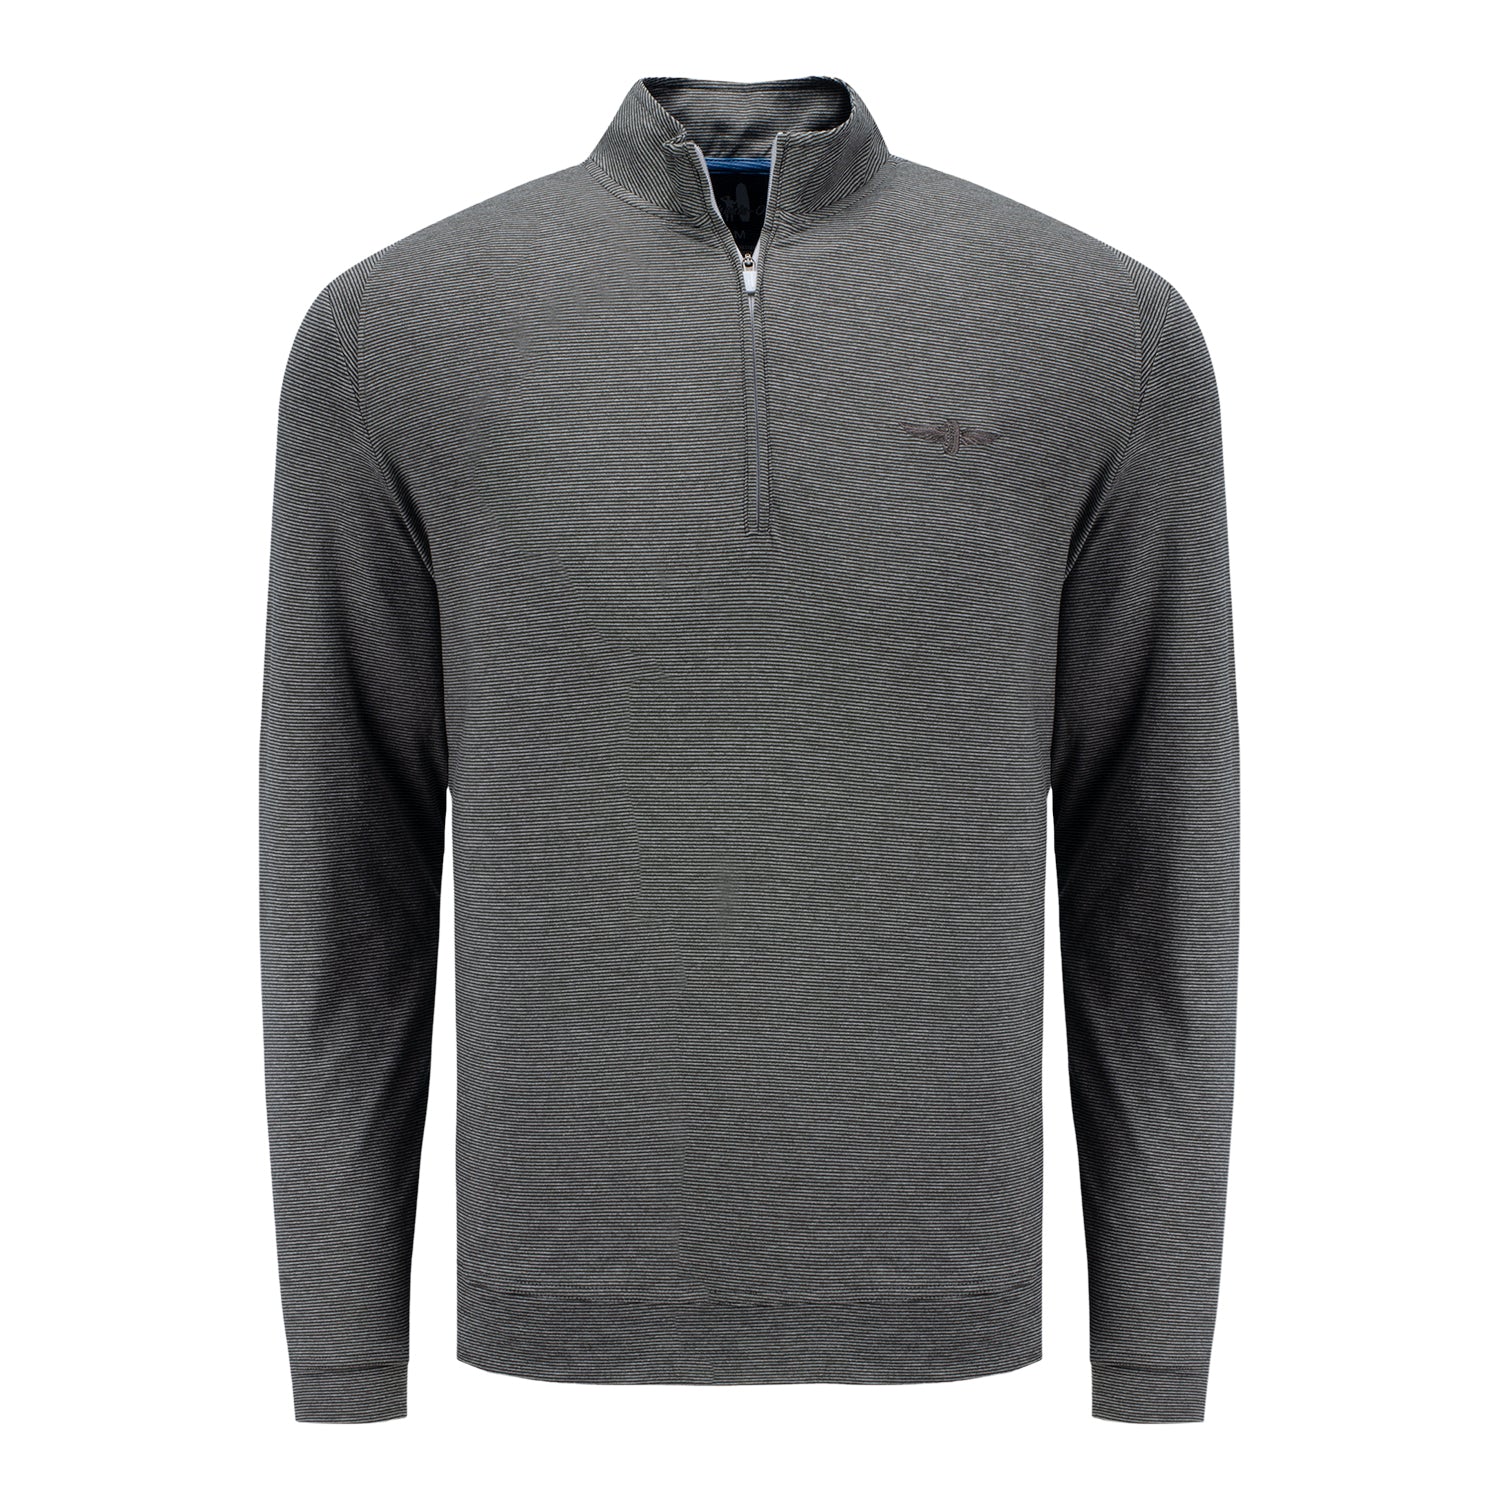 Wing and Wheel Johnnie-O Vaughn Meteor 1/4 Zip Pullover